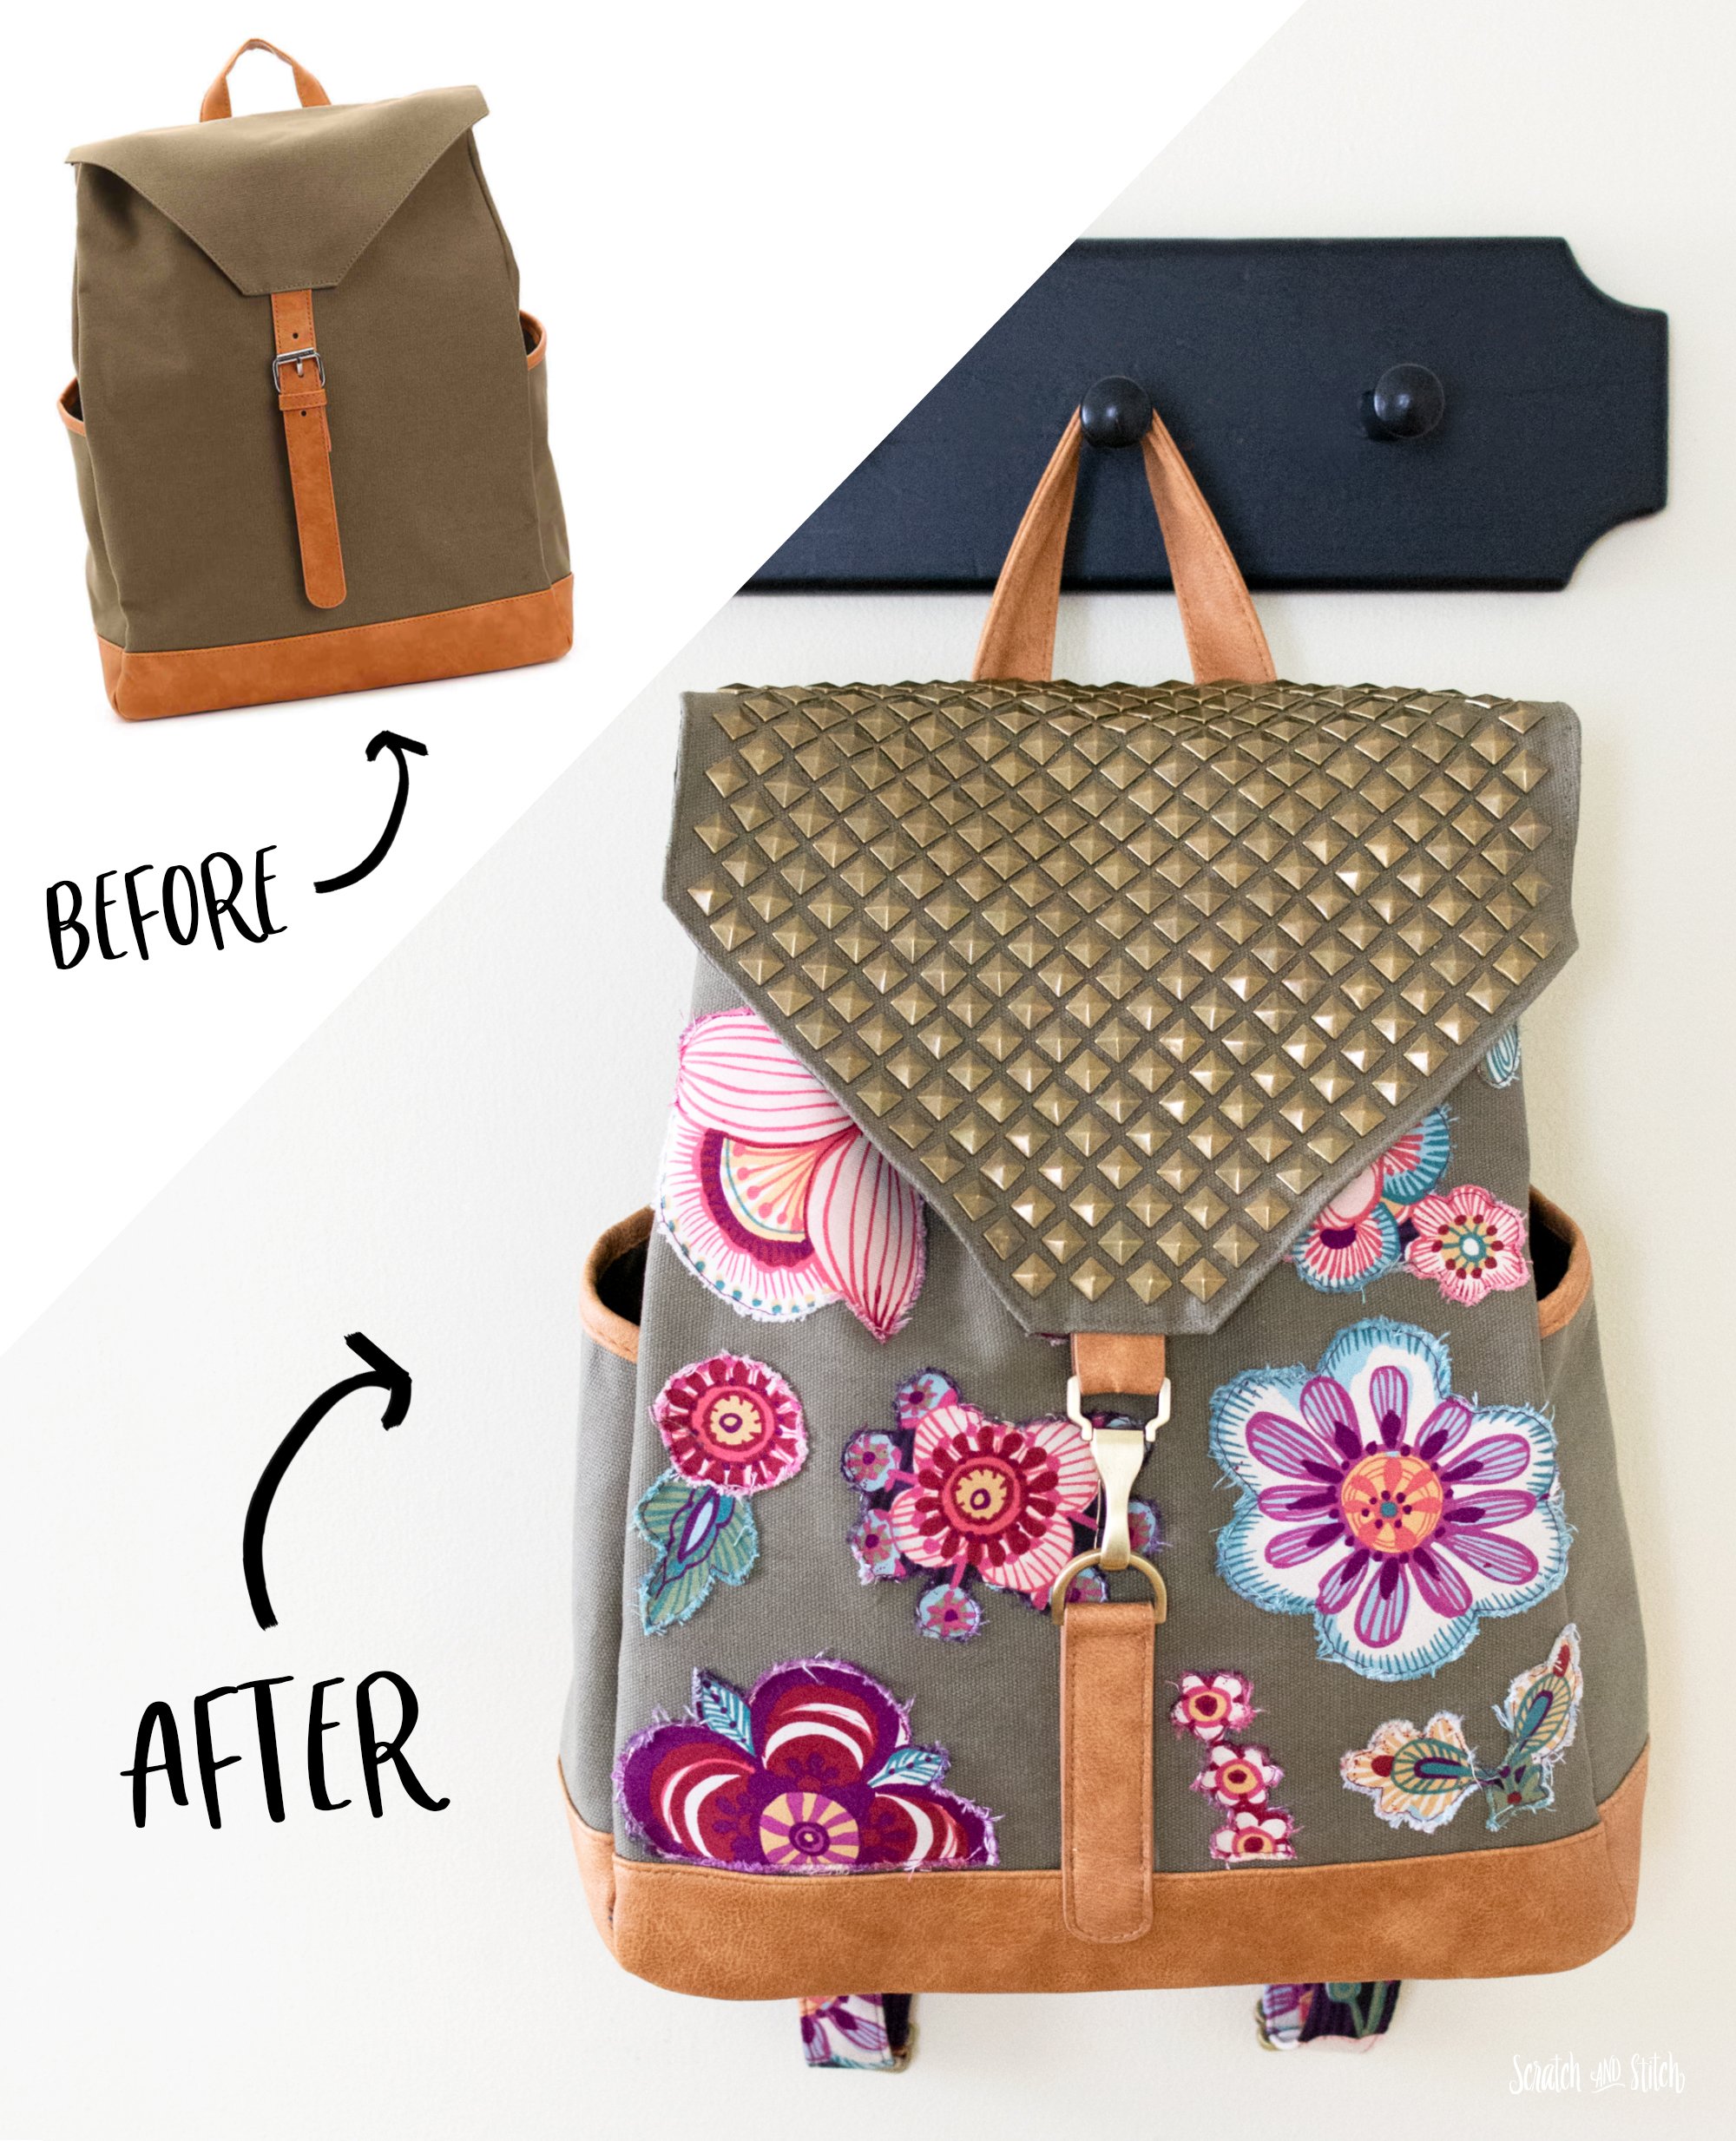 How-To: Repair an Old Backpack - Make